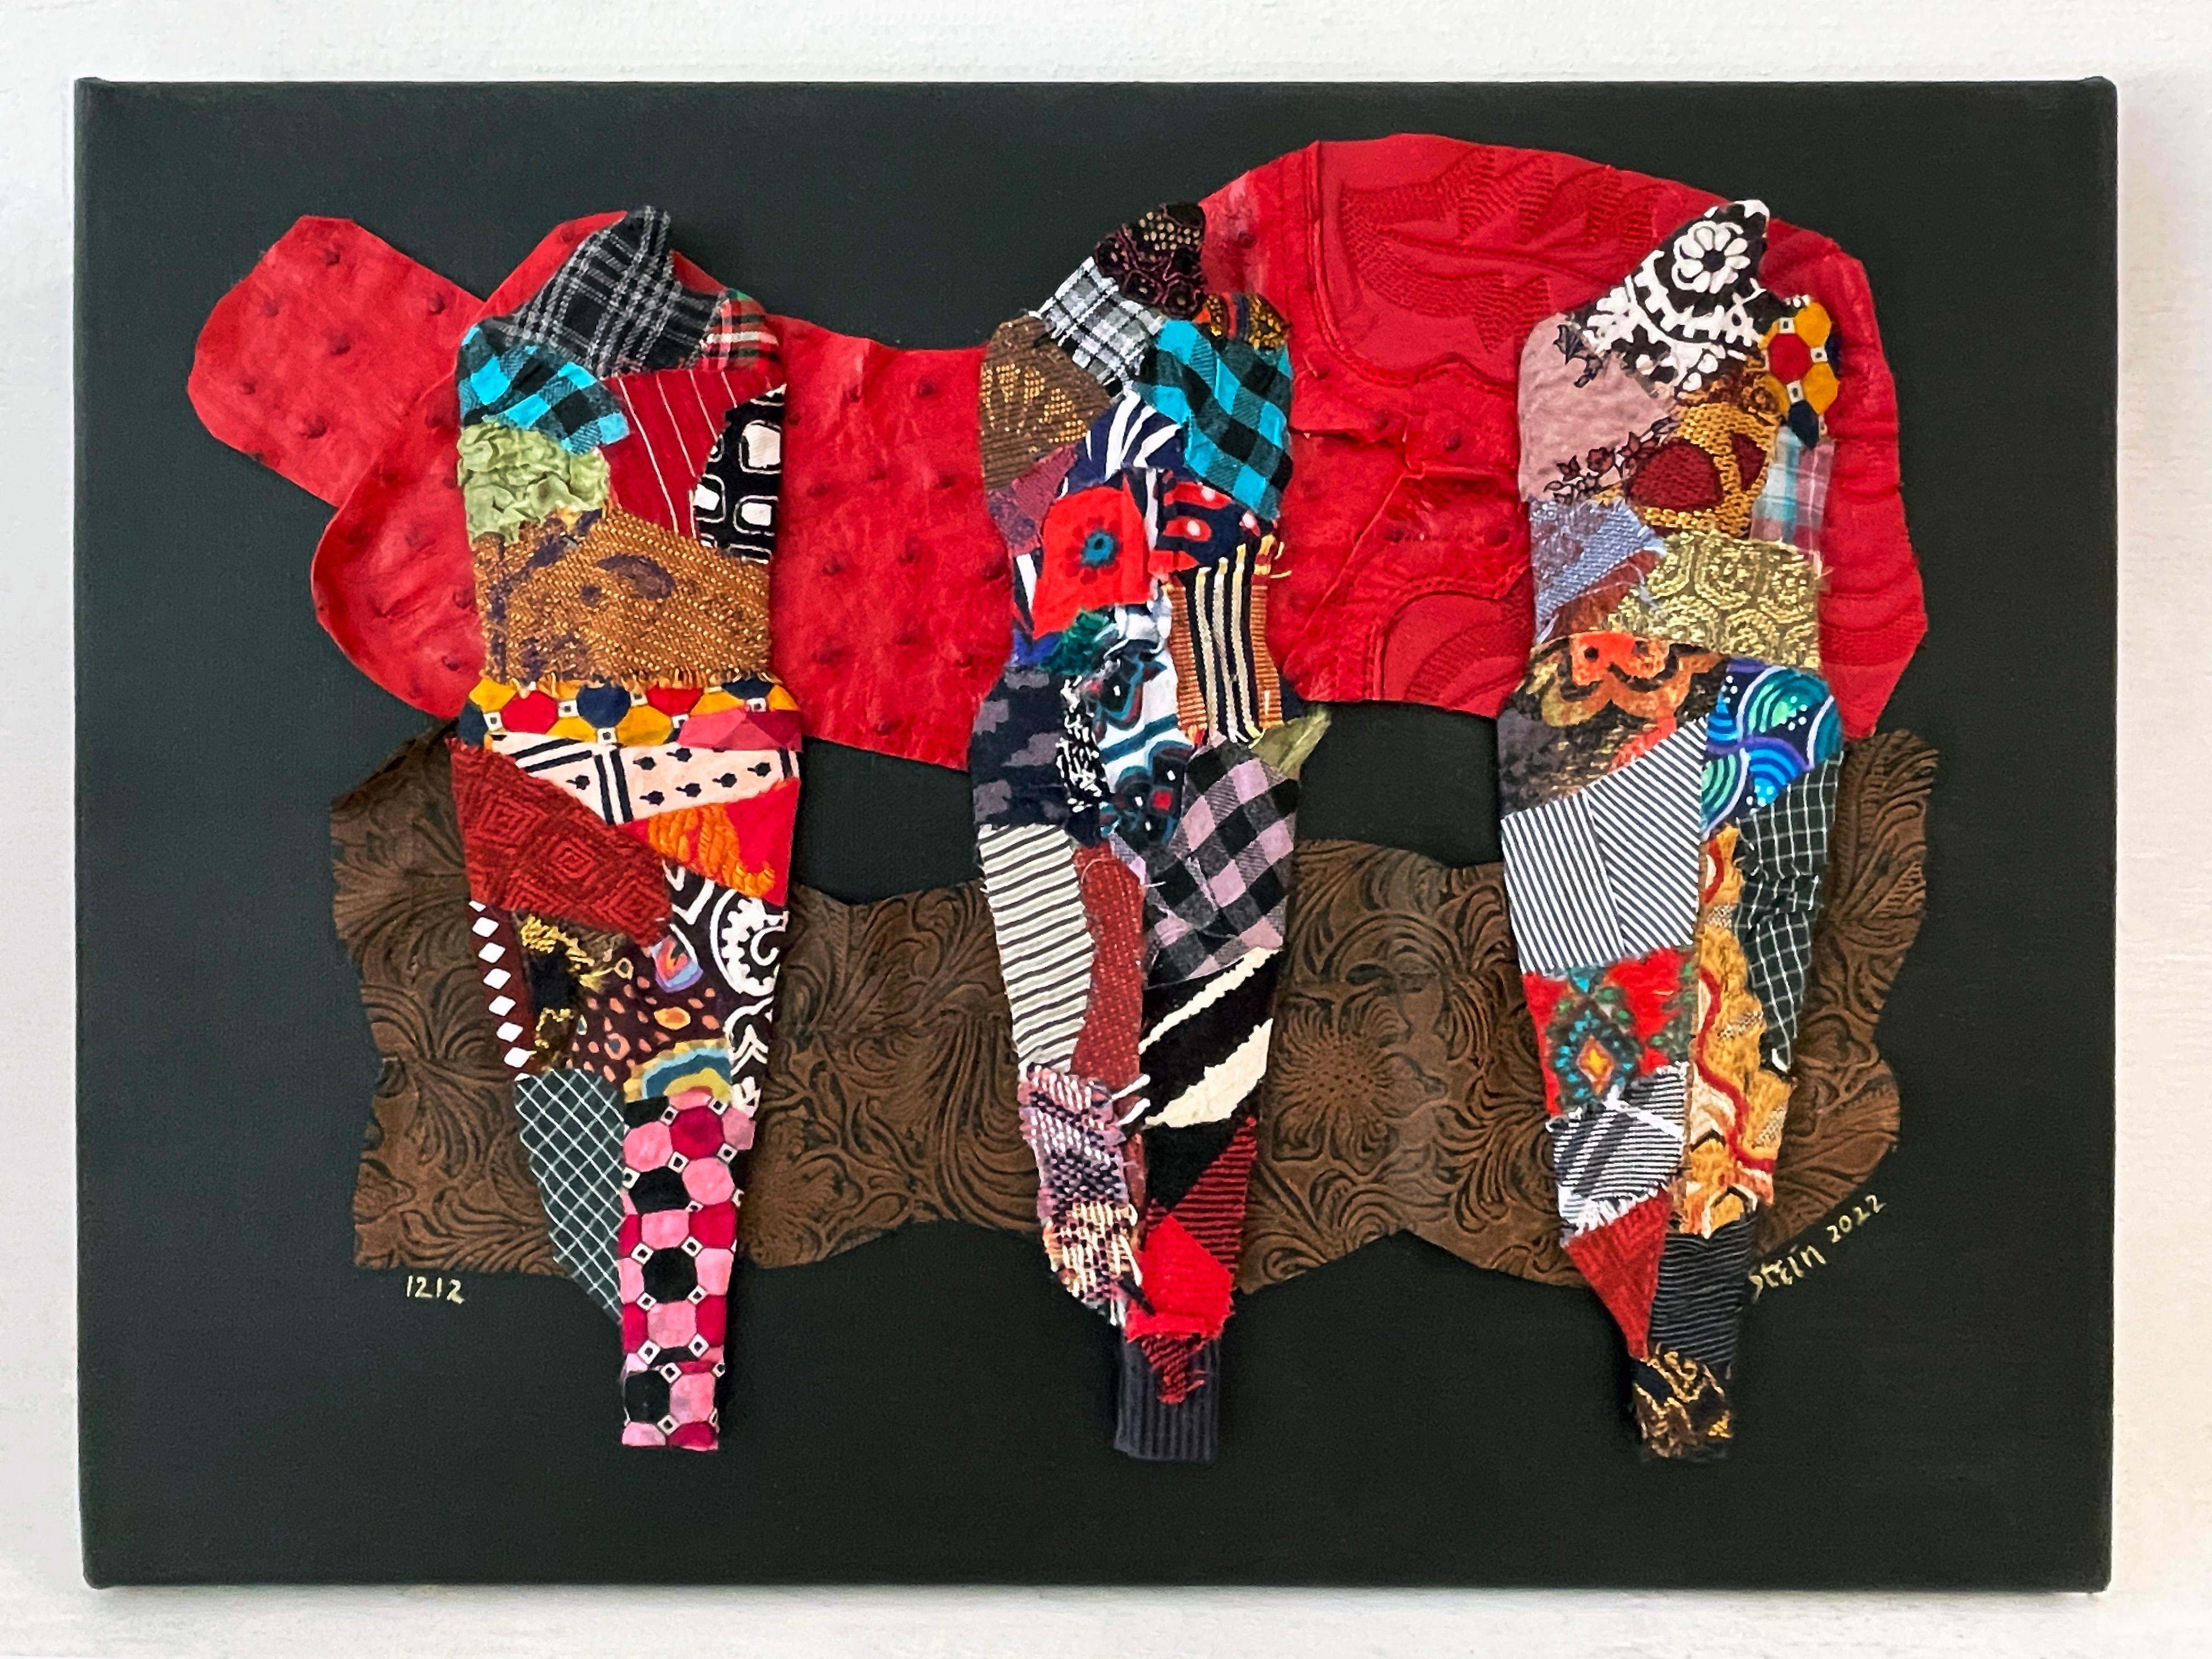 Linda Stein, 1212 - Contemporary Art 3D Mixed Media Fabric Sculptural Collage

Linda Stein started her Knights of Protection series after she was forced to evacuate her New York downtown studio for a year post-9/11.  Stein's Knights are shield-like